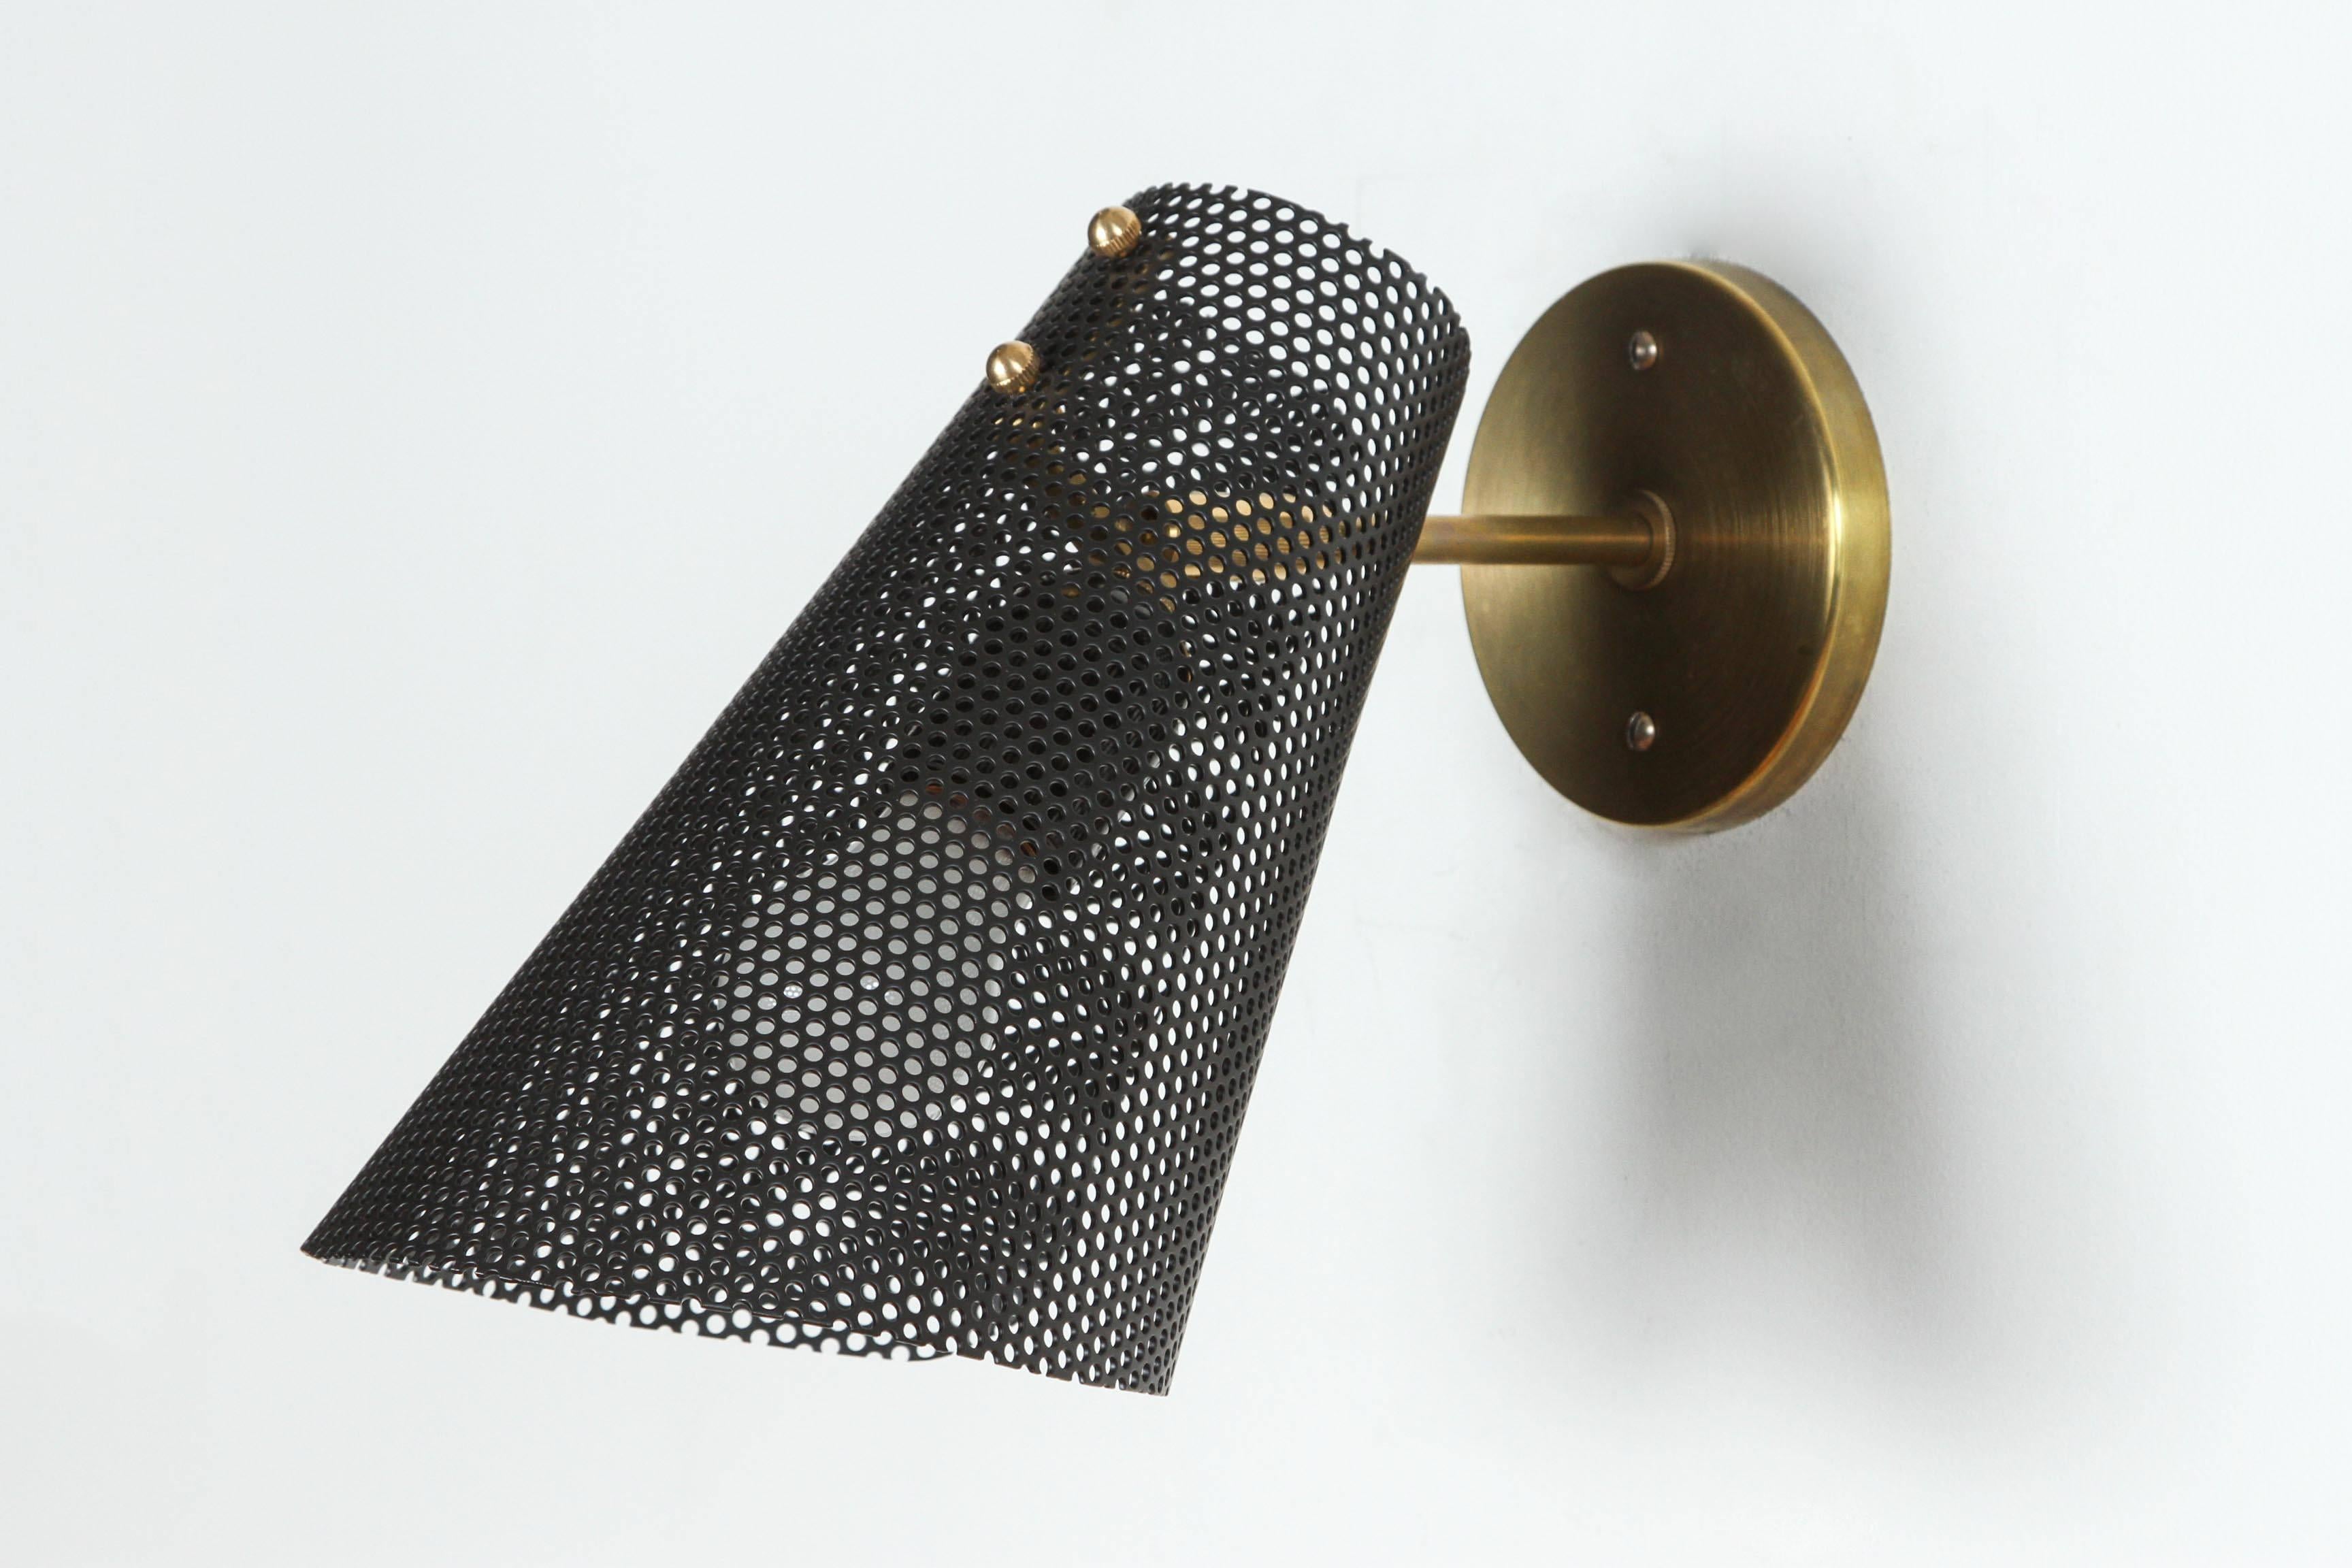 Perferated scoop sconce by Lawson-Fenning.